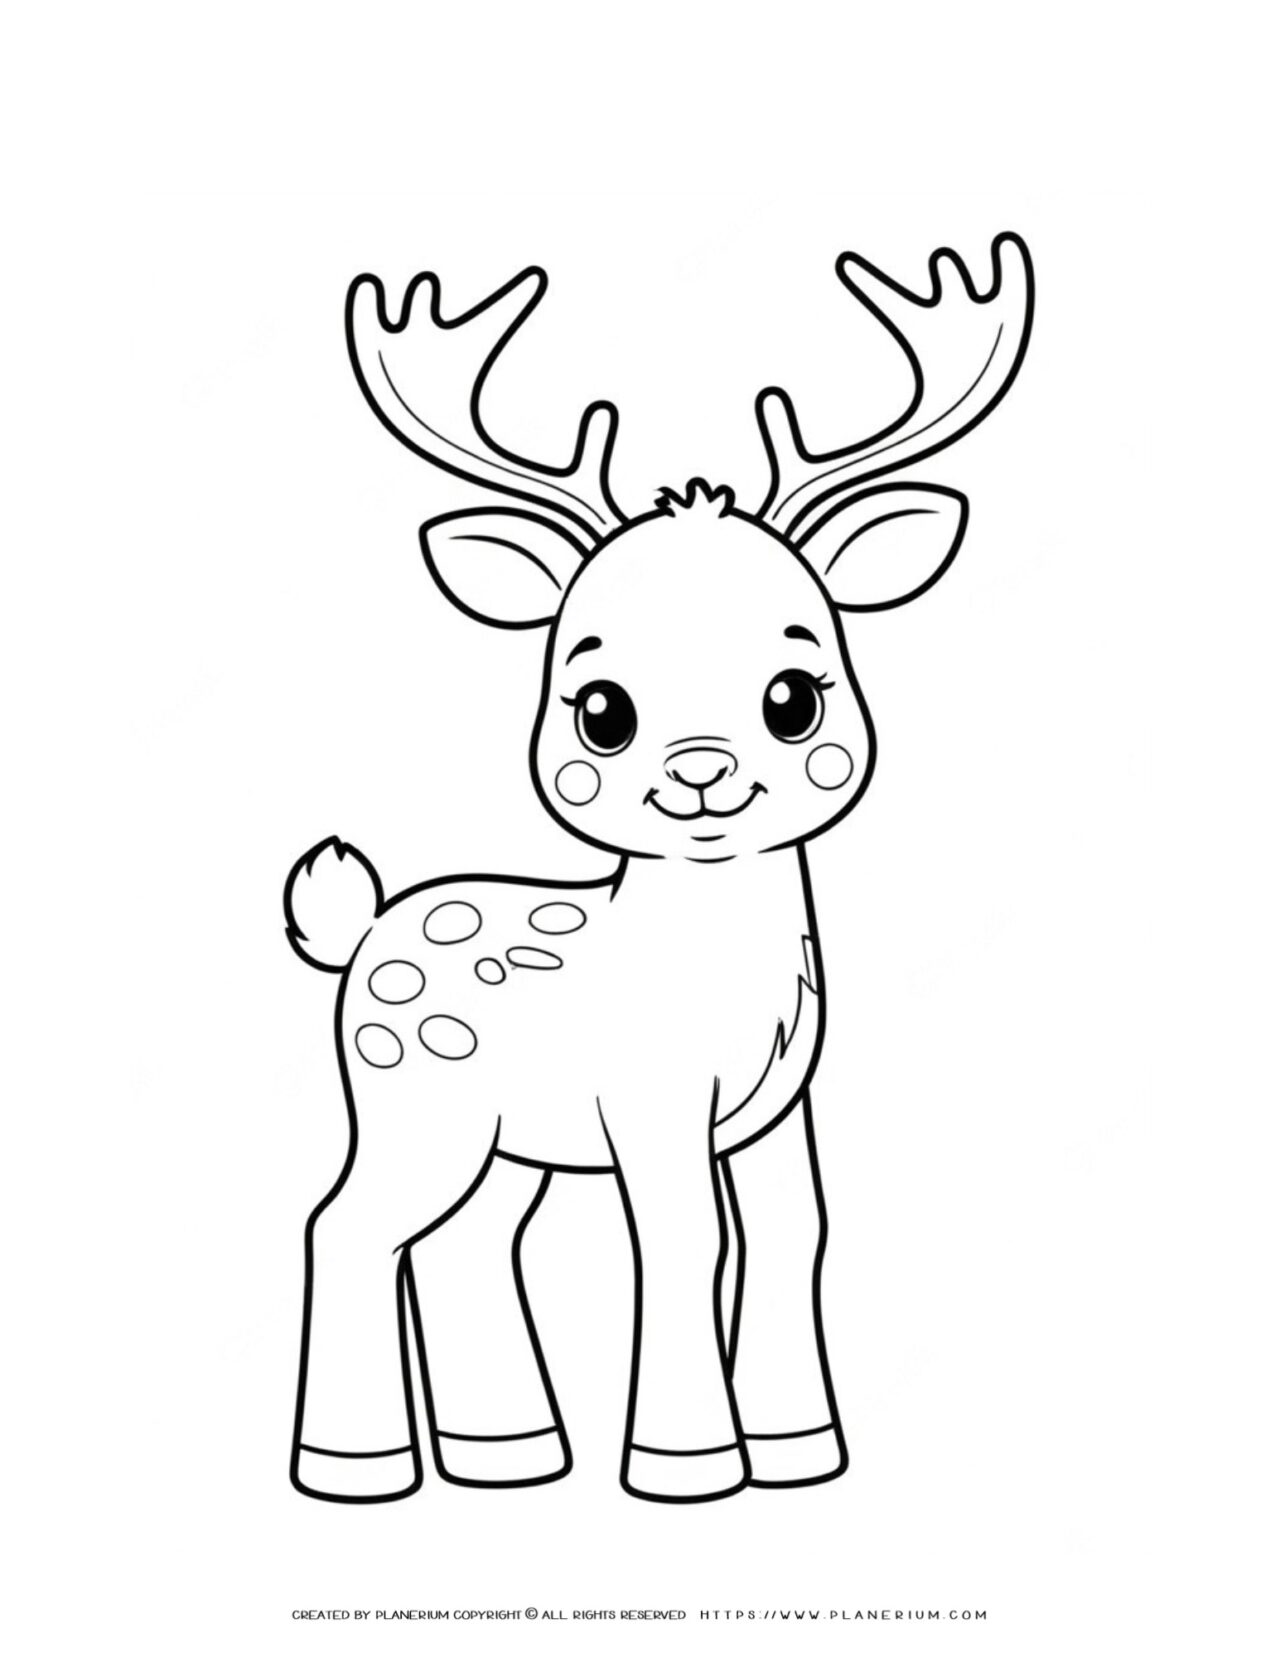 cute-baby-reindeer-wild-animal-coloring-page-for-kids